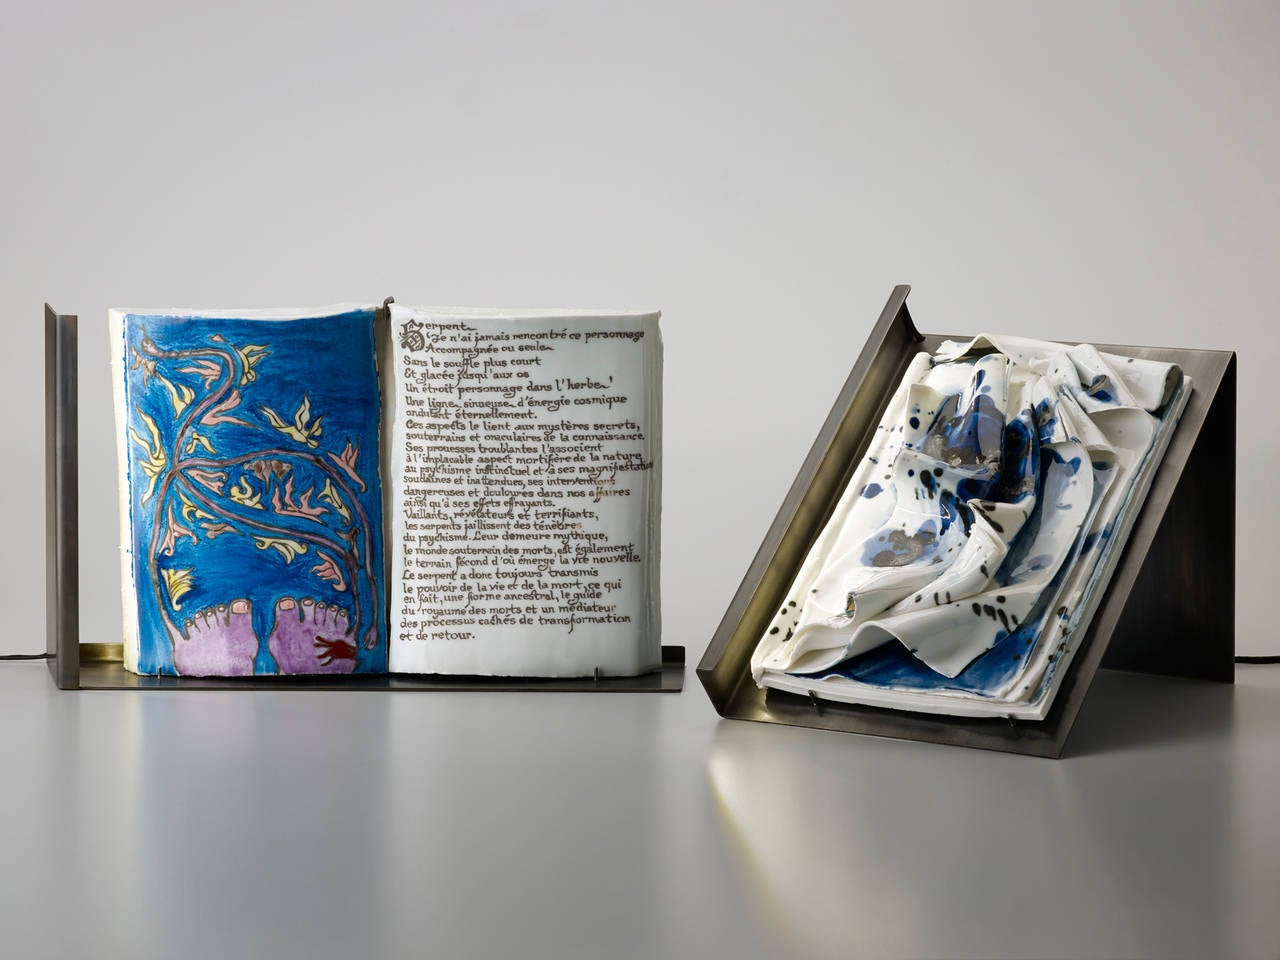 Chinese 'Serpent', a Unique Handmade Porcelain Book and Table Light Sculpture - In Stock